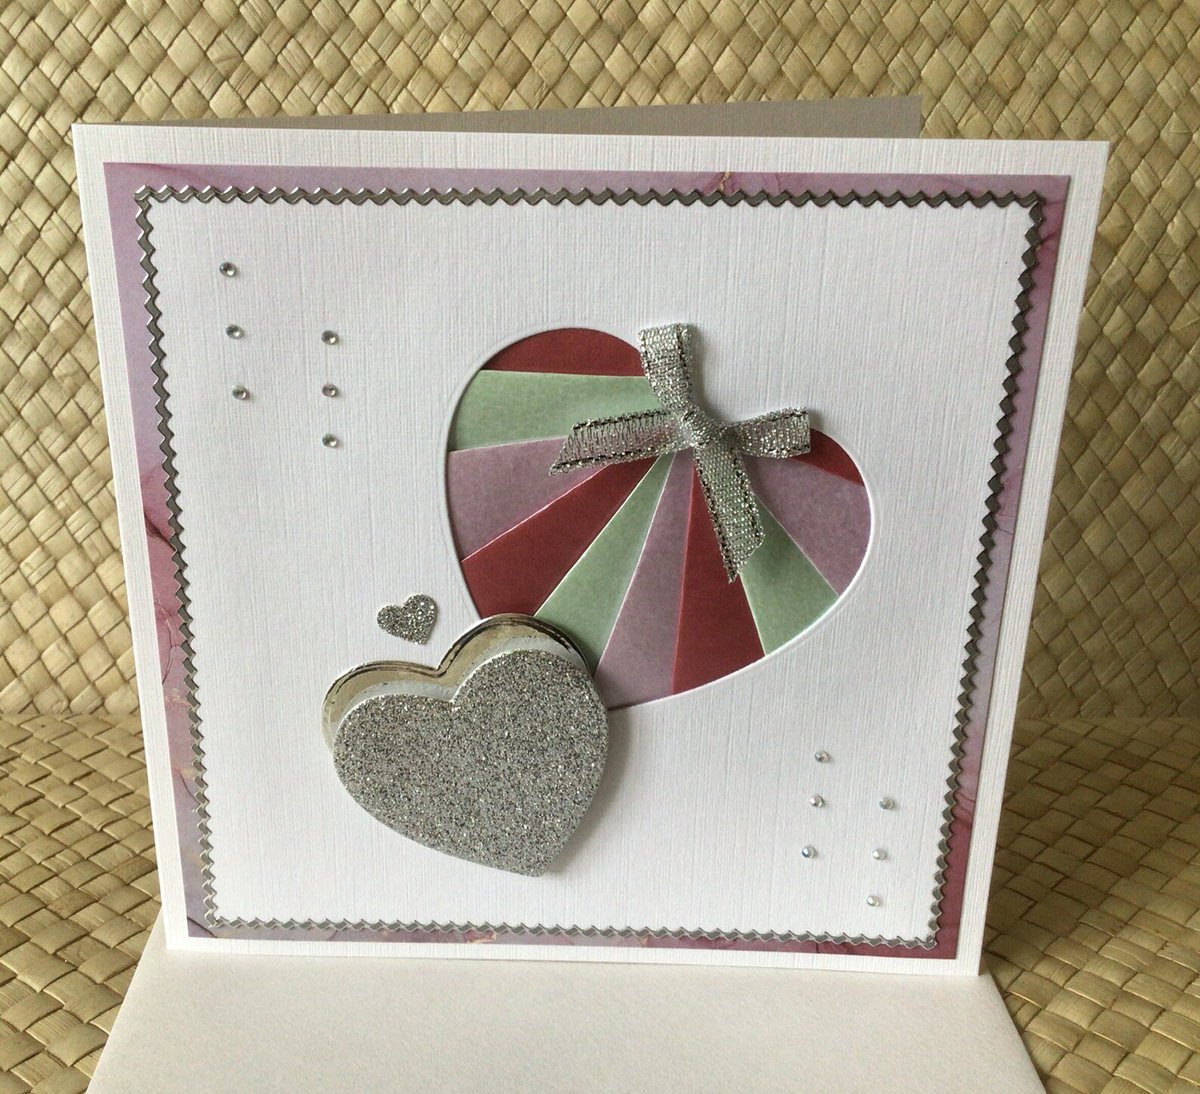 Rose Silver and Green Wedding Day Celebration Card for Anniversary, Engagement, Hearts Entwined Decoupage etsy.me/43Wt8xC via @Etsy #UKGiftHour #handmadeinUK #weddinginspiration #anniversary #etsyfinds #TheCraftersUK